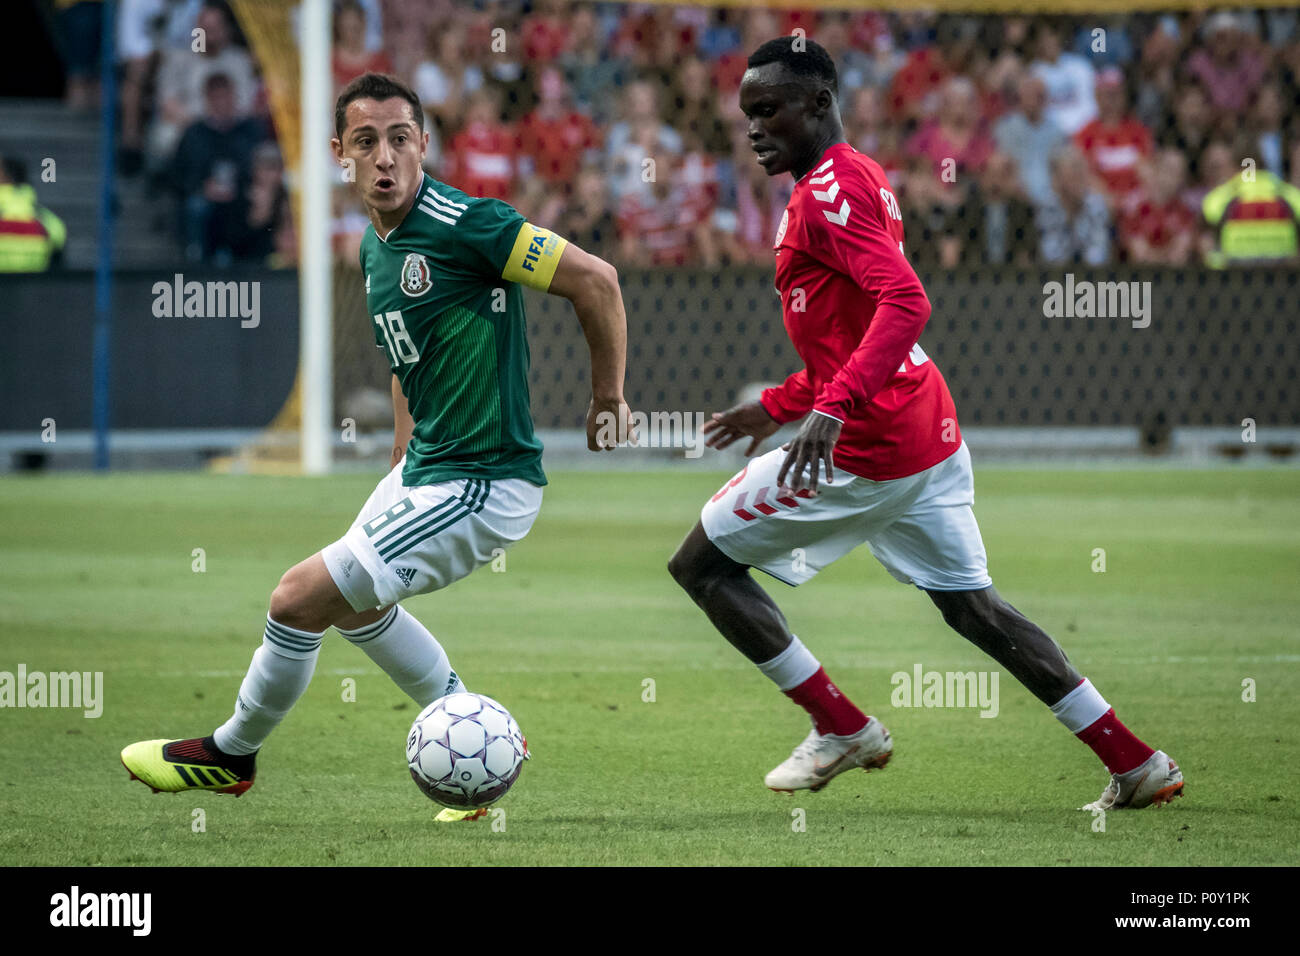 Denmark, Brøndby - June 09, 2018. Pione Sisto (23) of Denmark and Andres Guardado (18) of Mexico seen during the football friendly between Denmark and Mexico at Brøndby Stadion. (Photo credit: Gonzales Photo - Kim M. Leland). Credit: Gonzales Photo/Alamy Live News Stock Photo